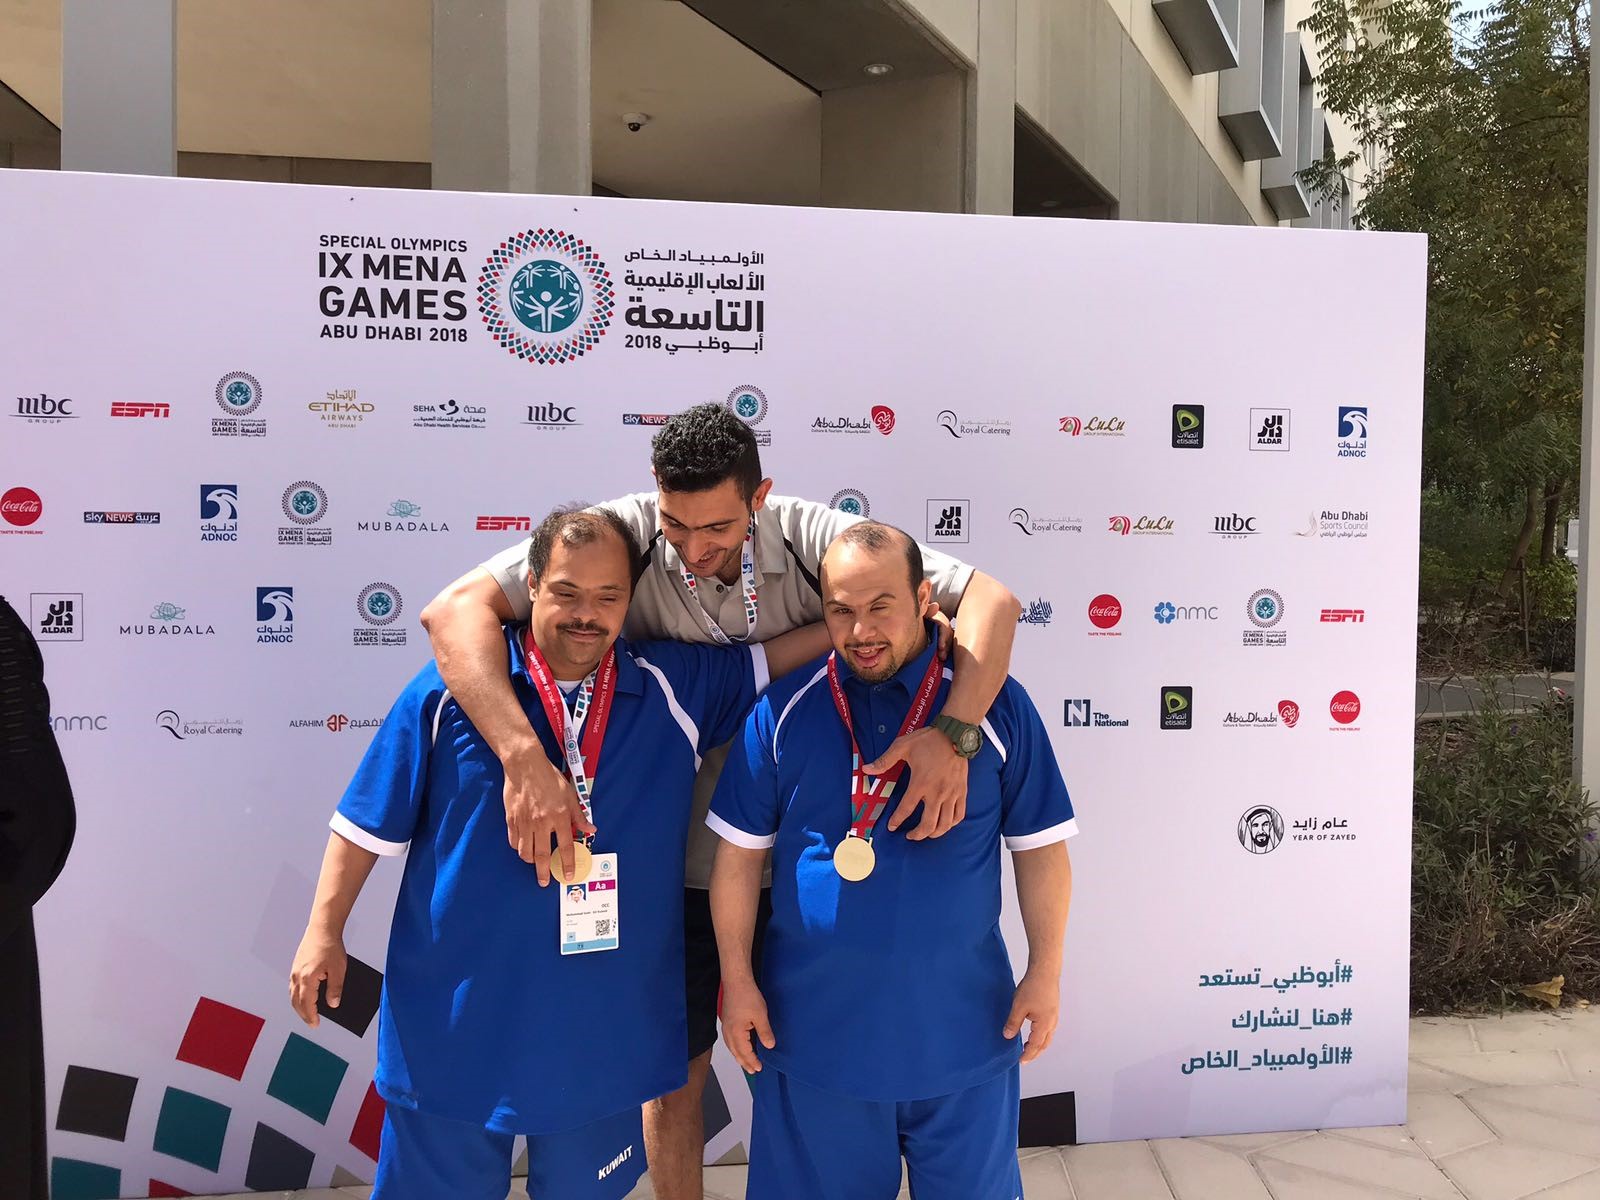 Kuwaiti athletes with intellectual disabilities won gold Mohammad Sami and Mishal Al-Bader winners of gold medals in the swimming butterfly and Chest stroke races